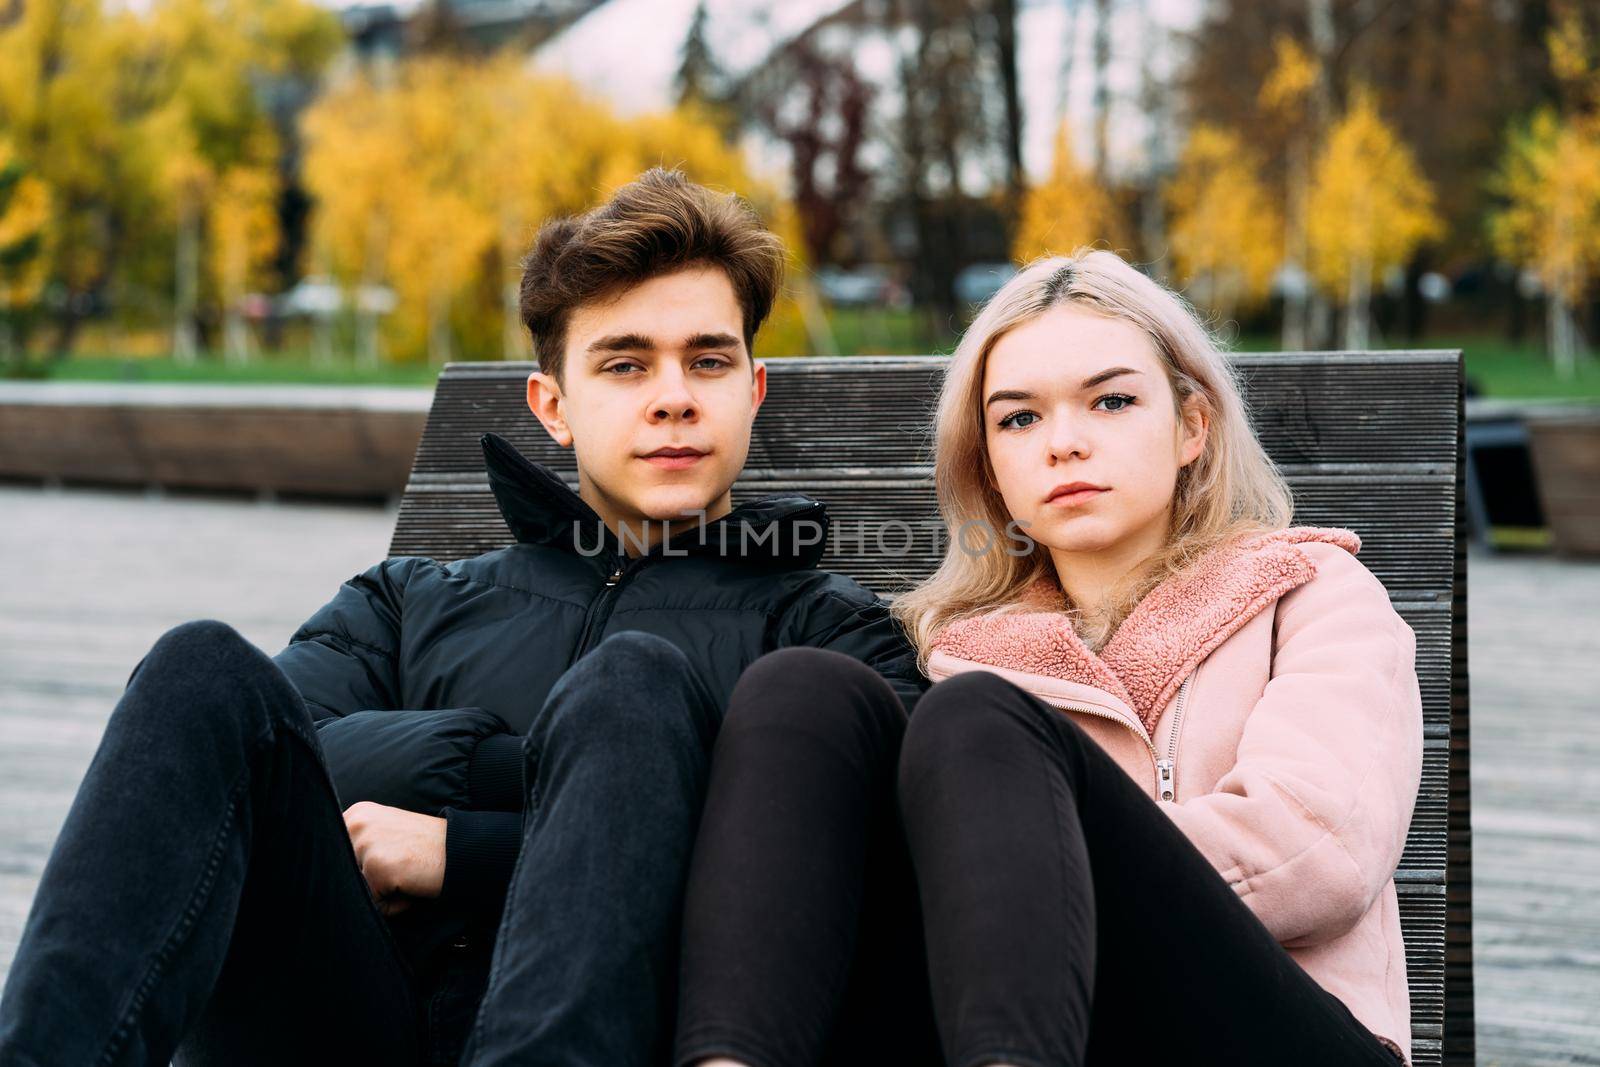 Loving teenagers are sitting on park bench in autumn, looking straight ahead. Teenage love concept. Outdoor portrait of cute brunette guy in dark jacket, beautiful young blonde girl in light pink jacket.